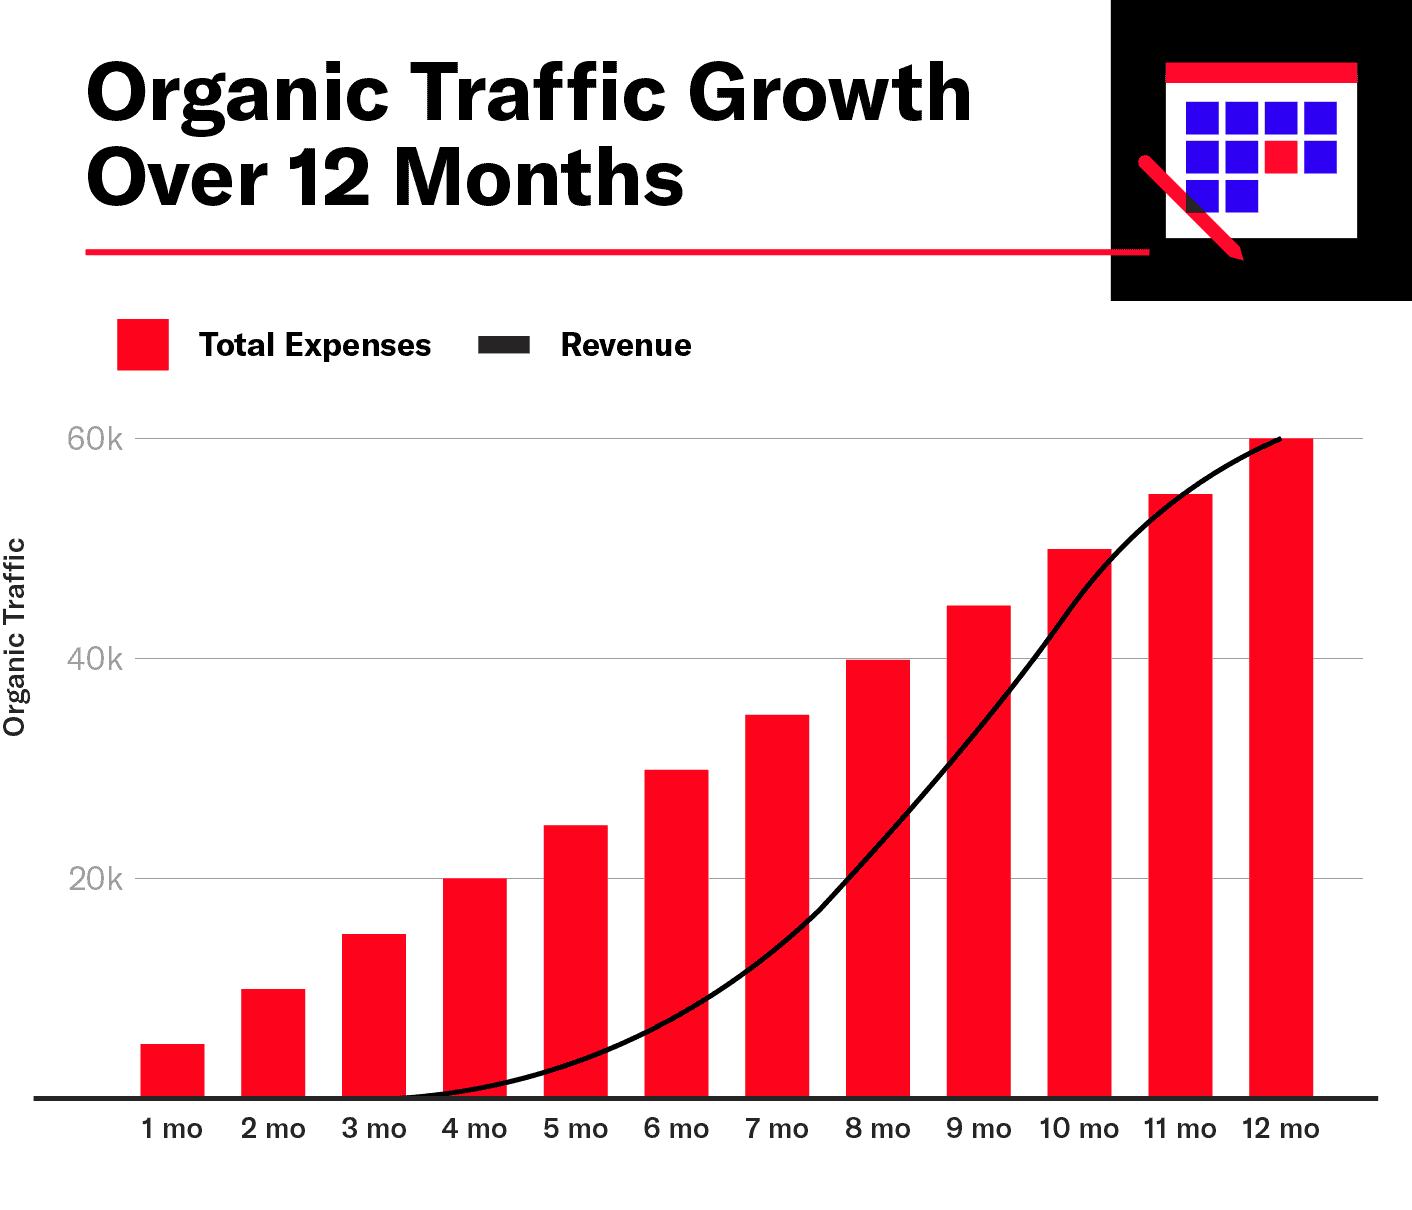 organic traffic projections for 12 months compared to expected revenue ROI